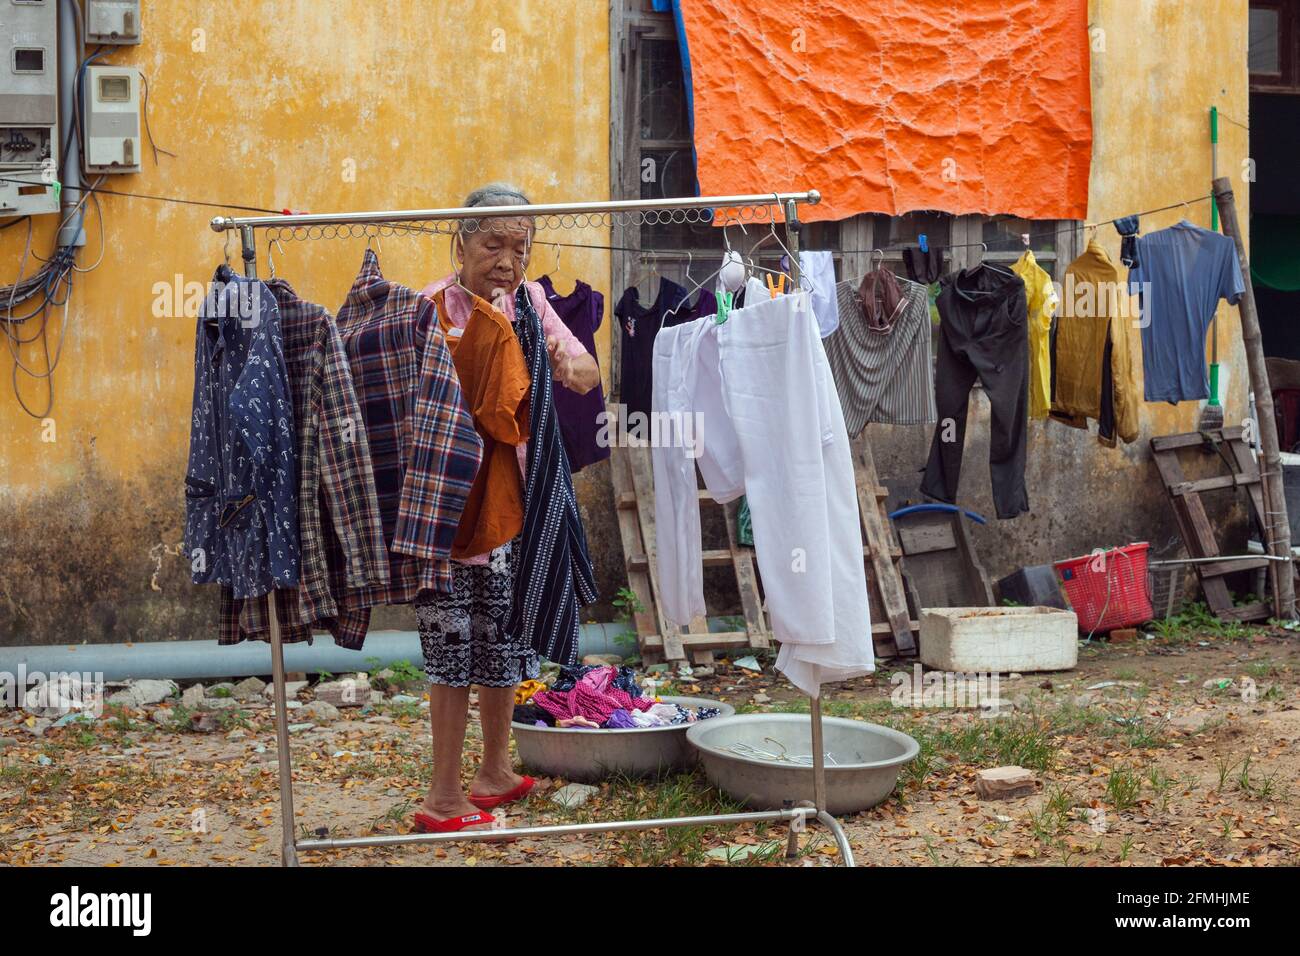 Elderly Vietnamese lady hanging clothing on washing line outside house in Hoi An, Vietnam Stock Photo